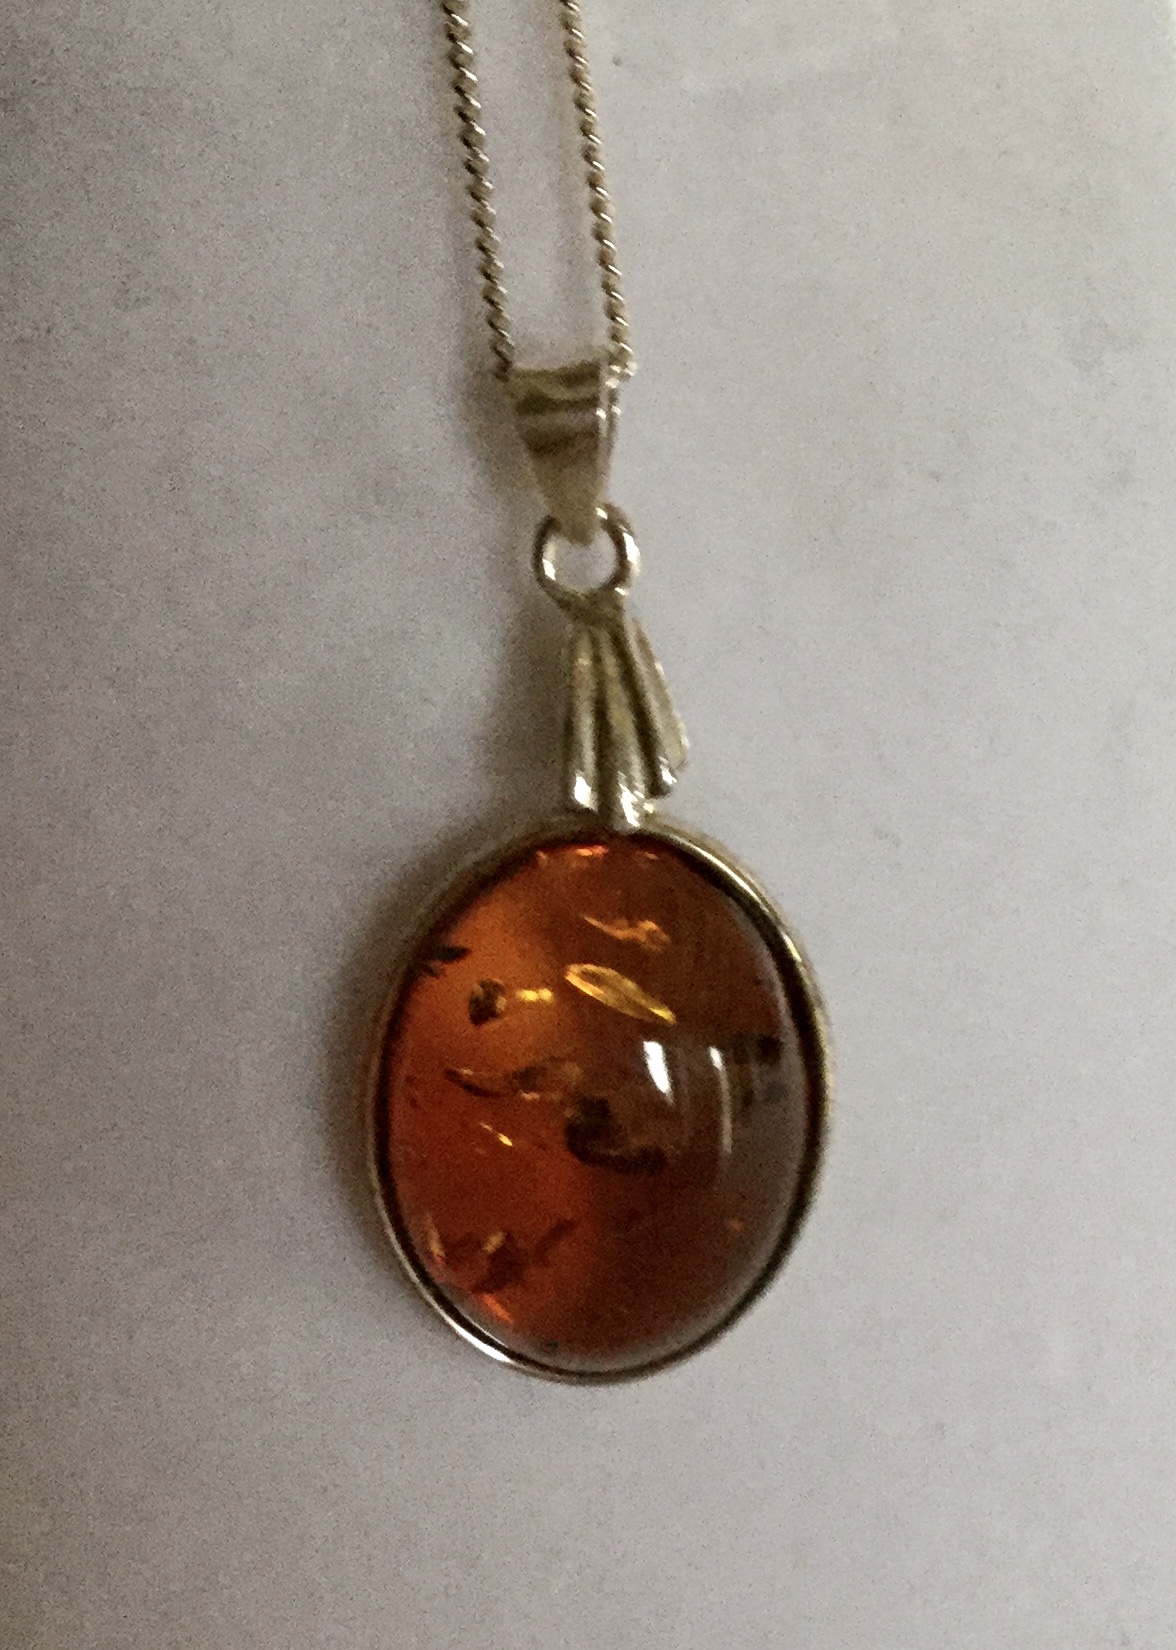 Baltic Amber Oval Pendant On Chain 925 Silver Necklace - Image 5 of 5